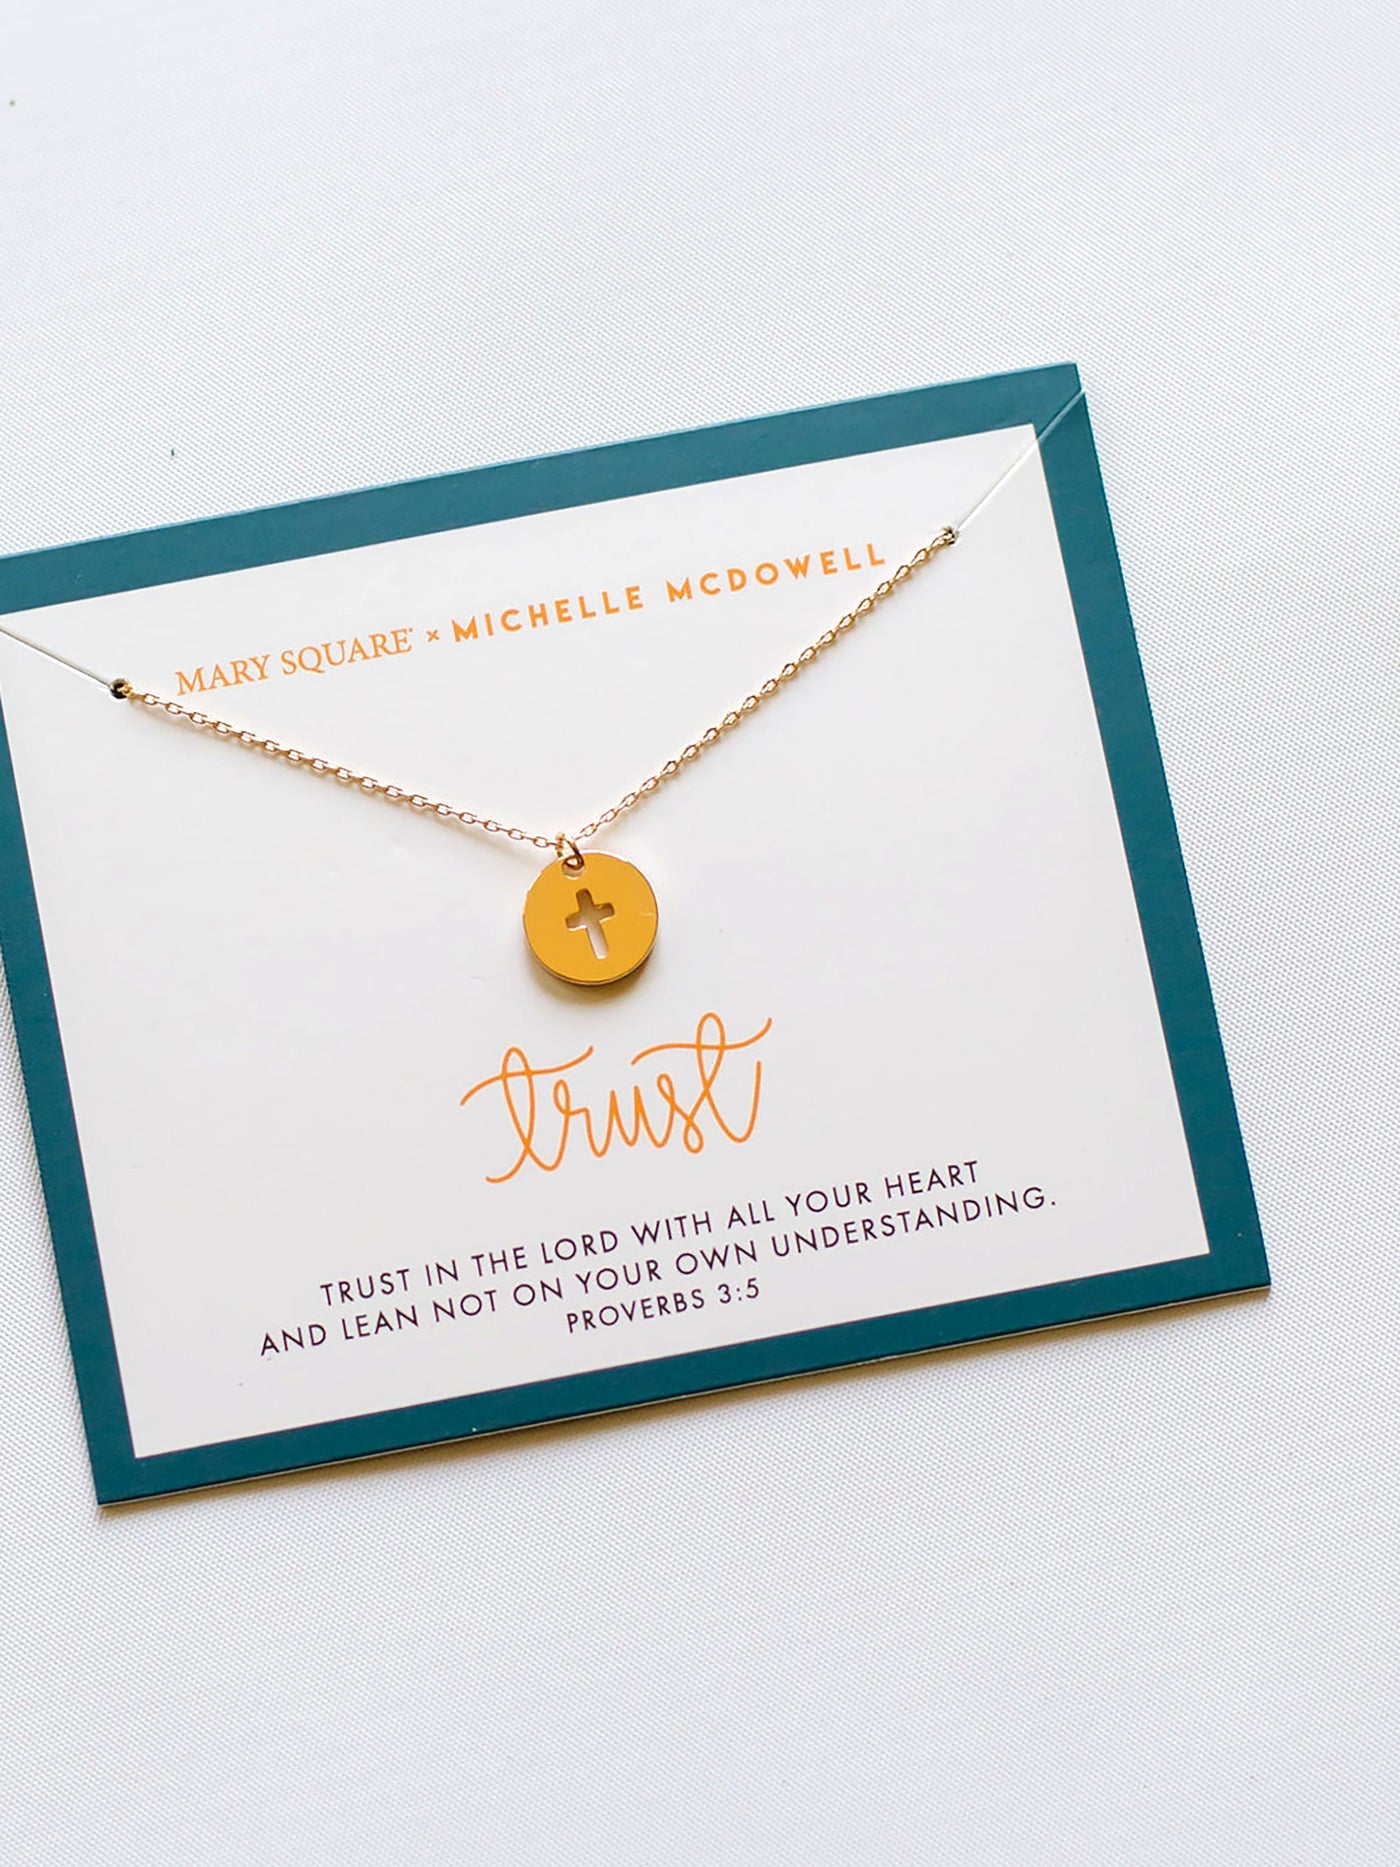 Trust Inspirational Necklace - Mary Square, LLC